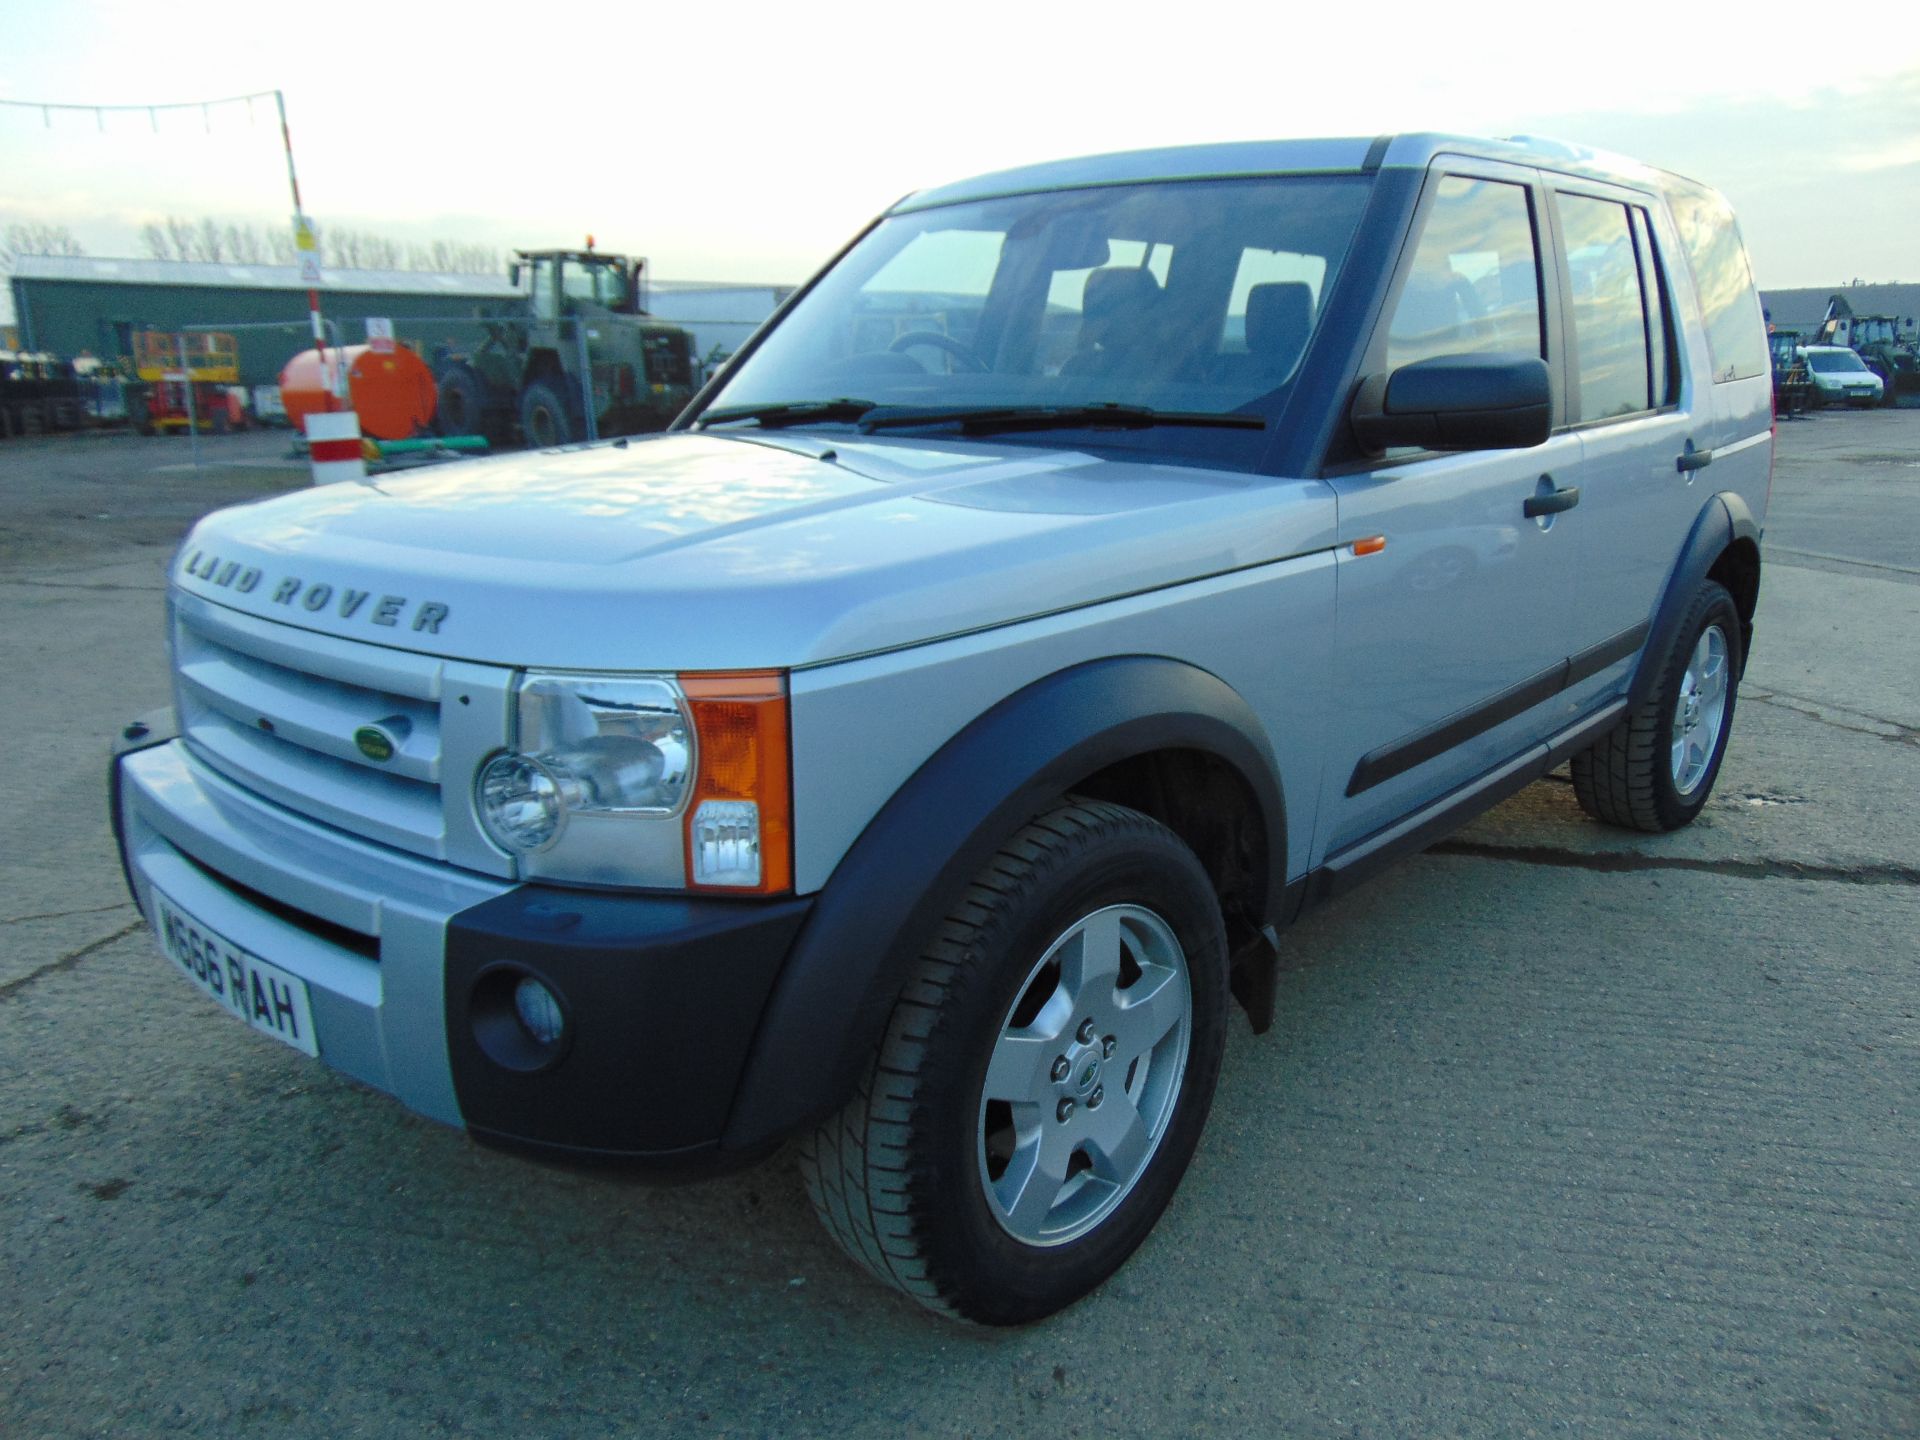 2006 Land Rover Discovery 3 2.7 TDV6 S Auto - Image 4 of 21